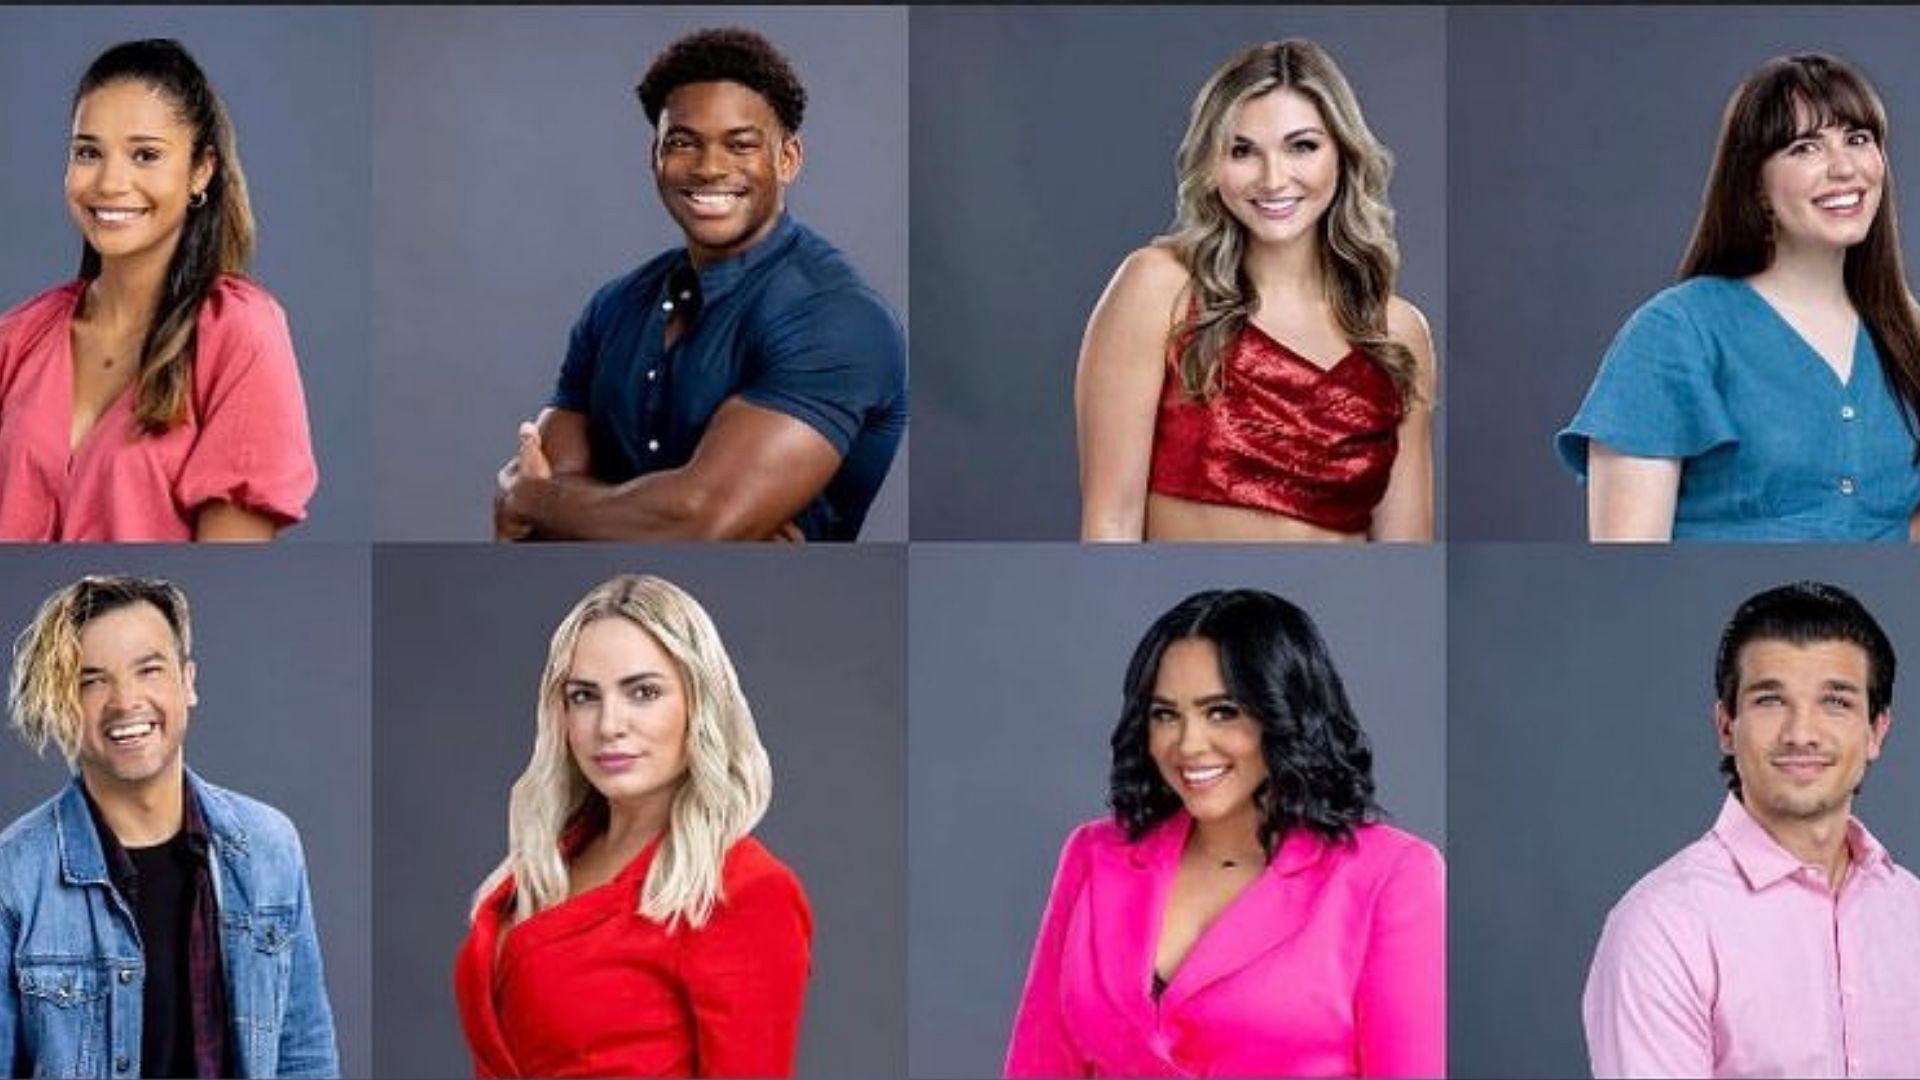 Where to follow Big Brother Season 24 cast on Instagram?